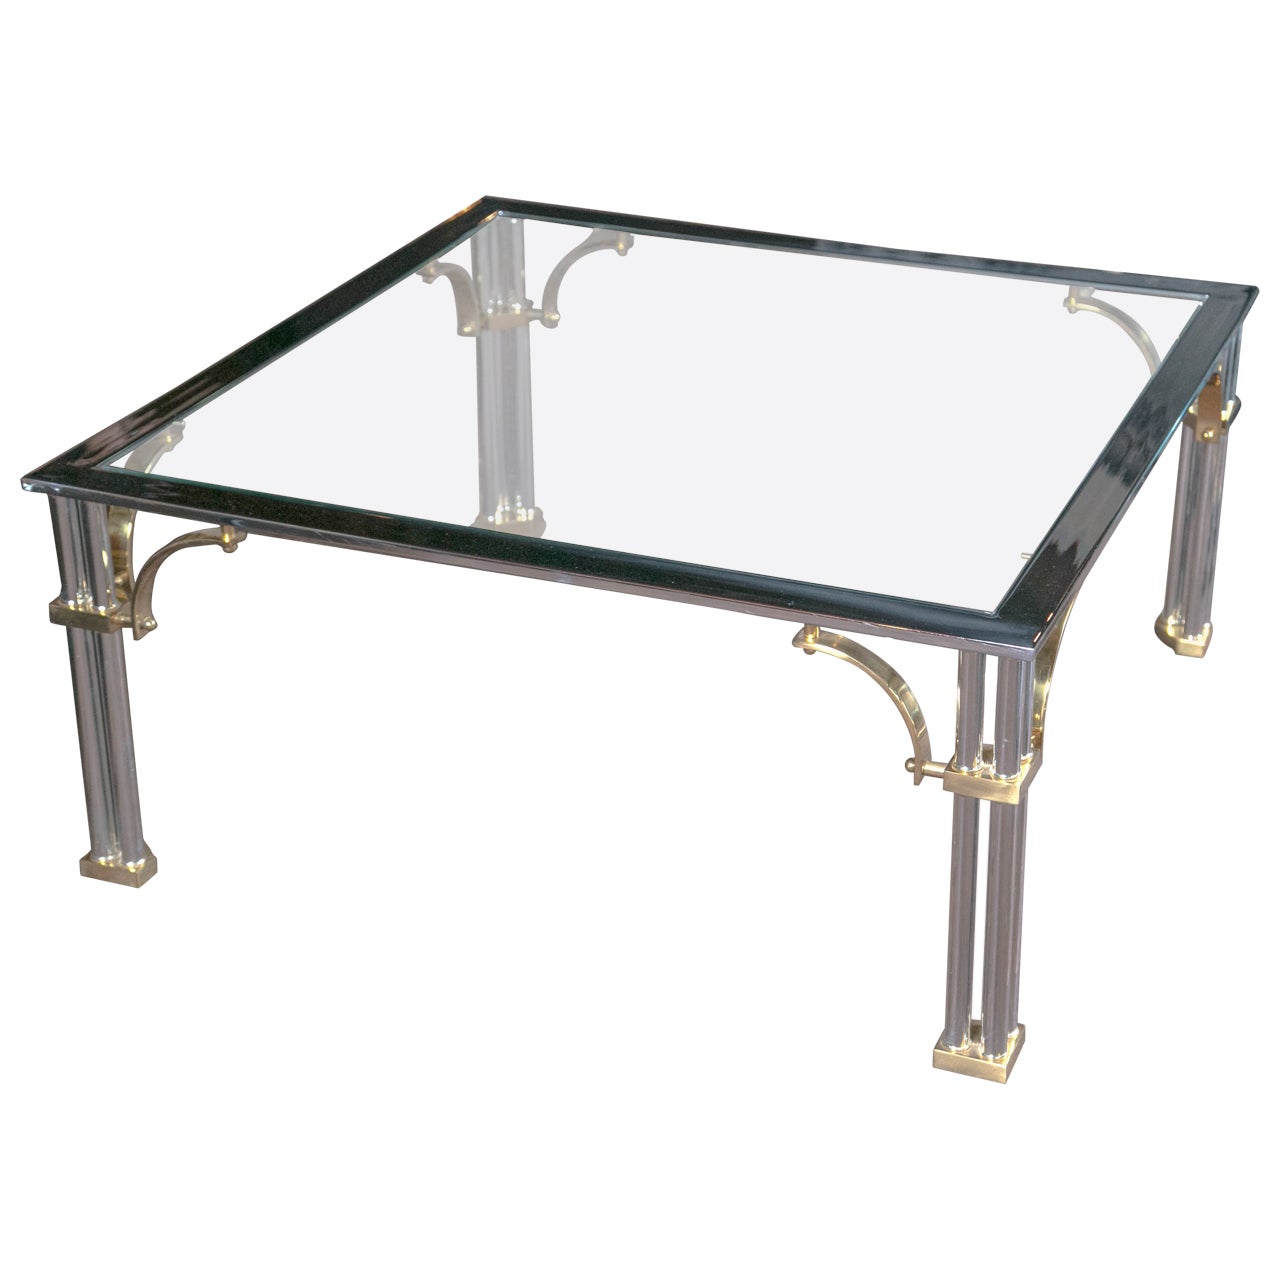 Chrome and Brass Square Fretwork Coffee Table